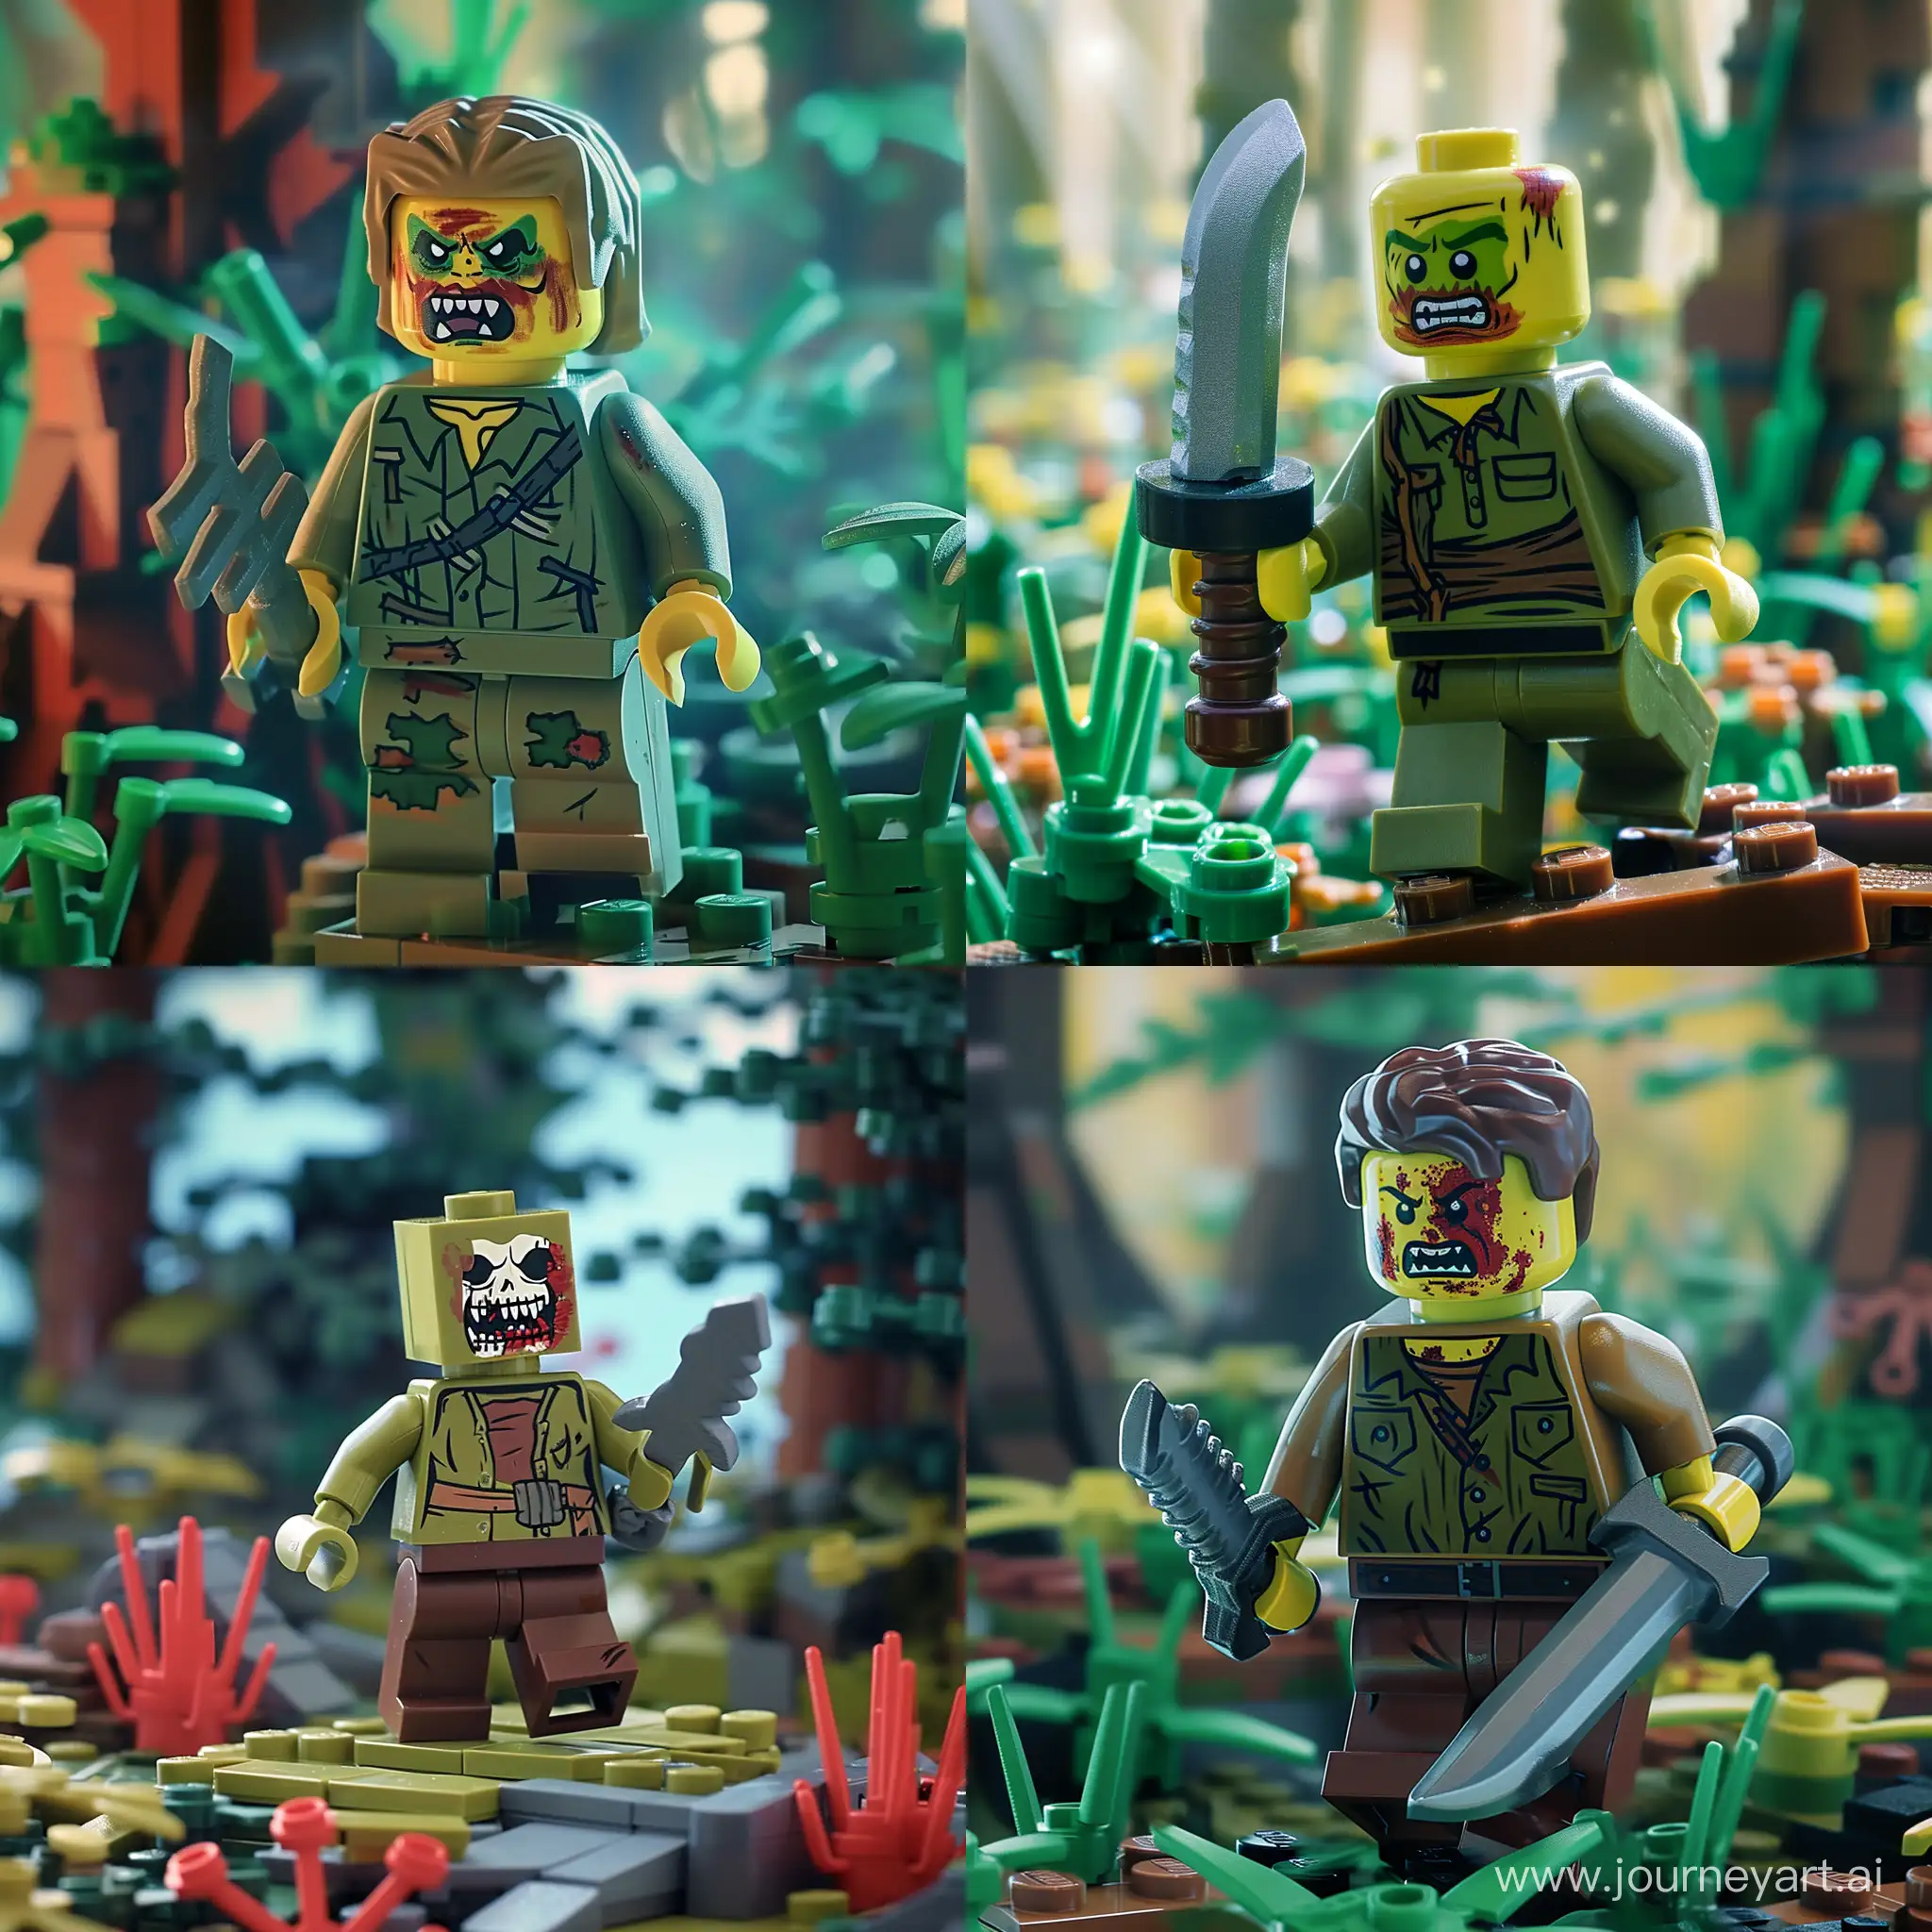 Make a cannibal out of the Lego-style Sons of the Forest video game